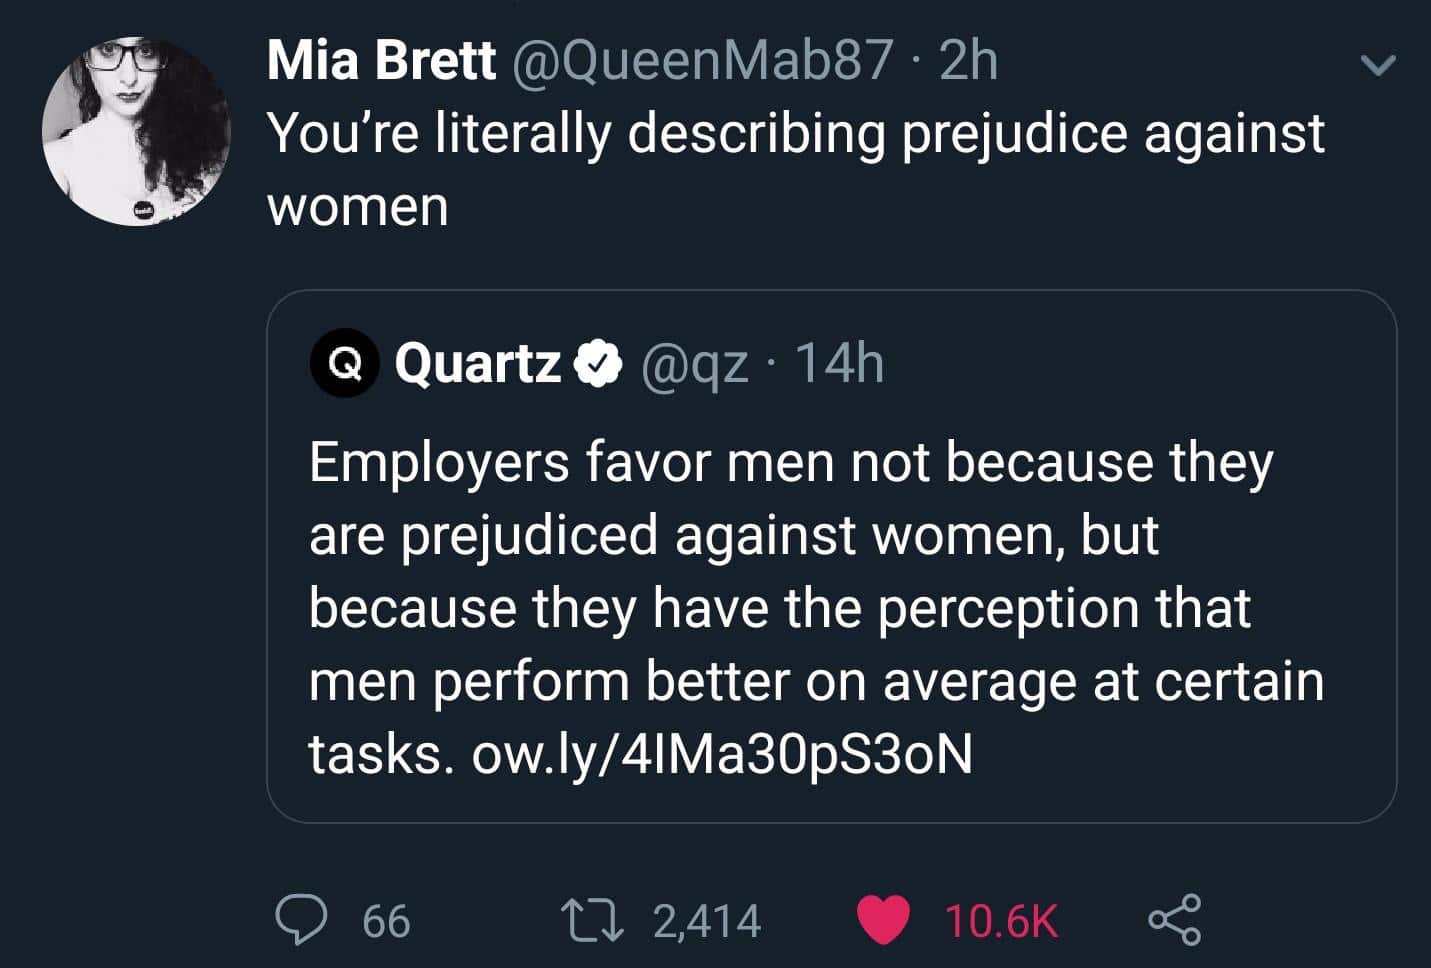 women feminine-memes women text: Mia Brett @QueenMab87 • 2h You're literally describing prejudice against women Q Quartze @qz • 14h Employers favor men not because they are prejudiced against women, but because they have the perception that men perform better on average at certain tasks. ow.Iy/41Ma30pS30N 0 66 2,414 0 10.6K < 